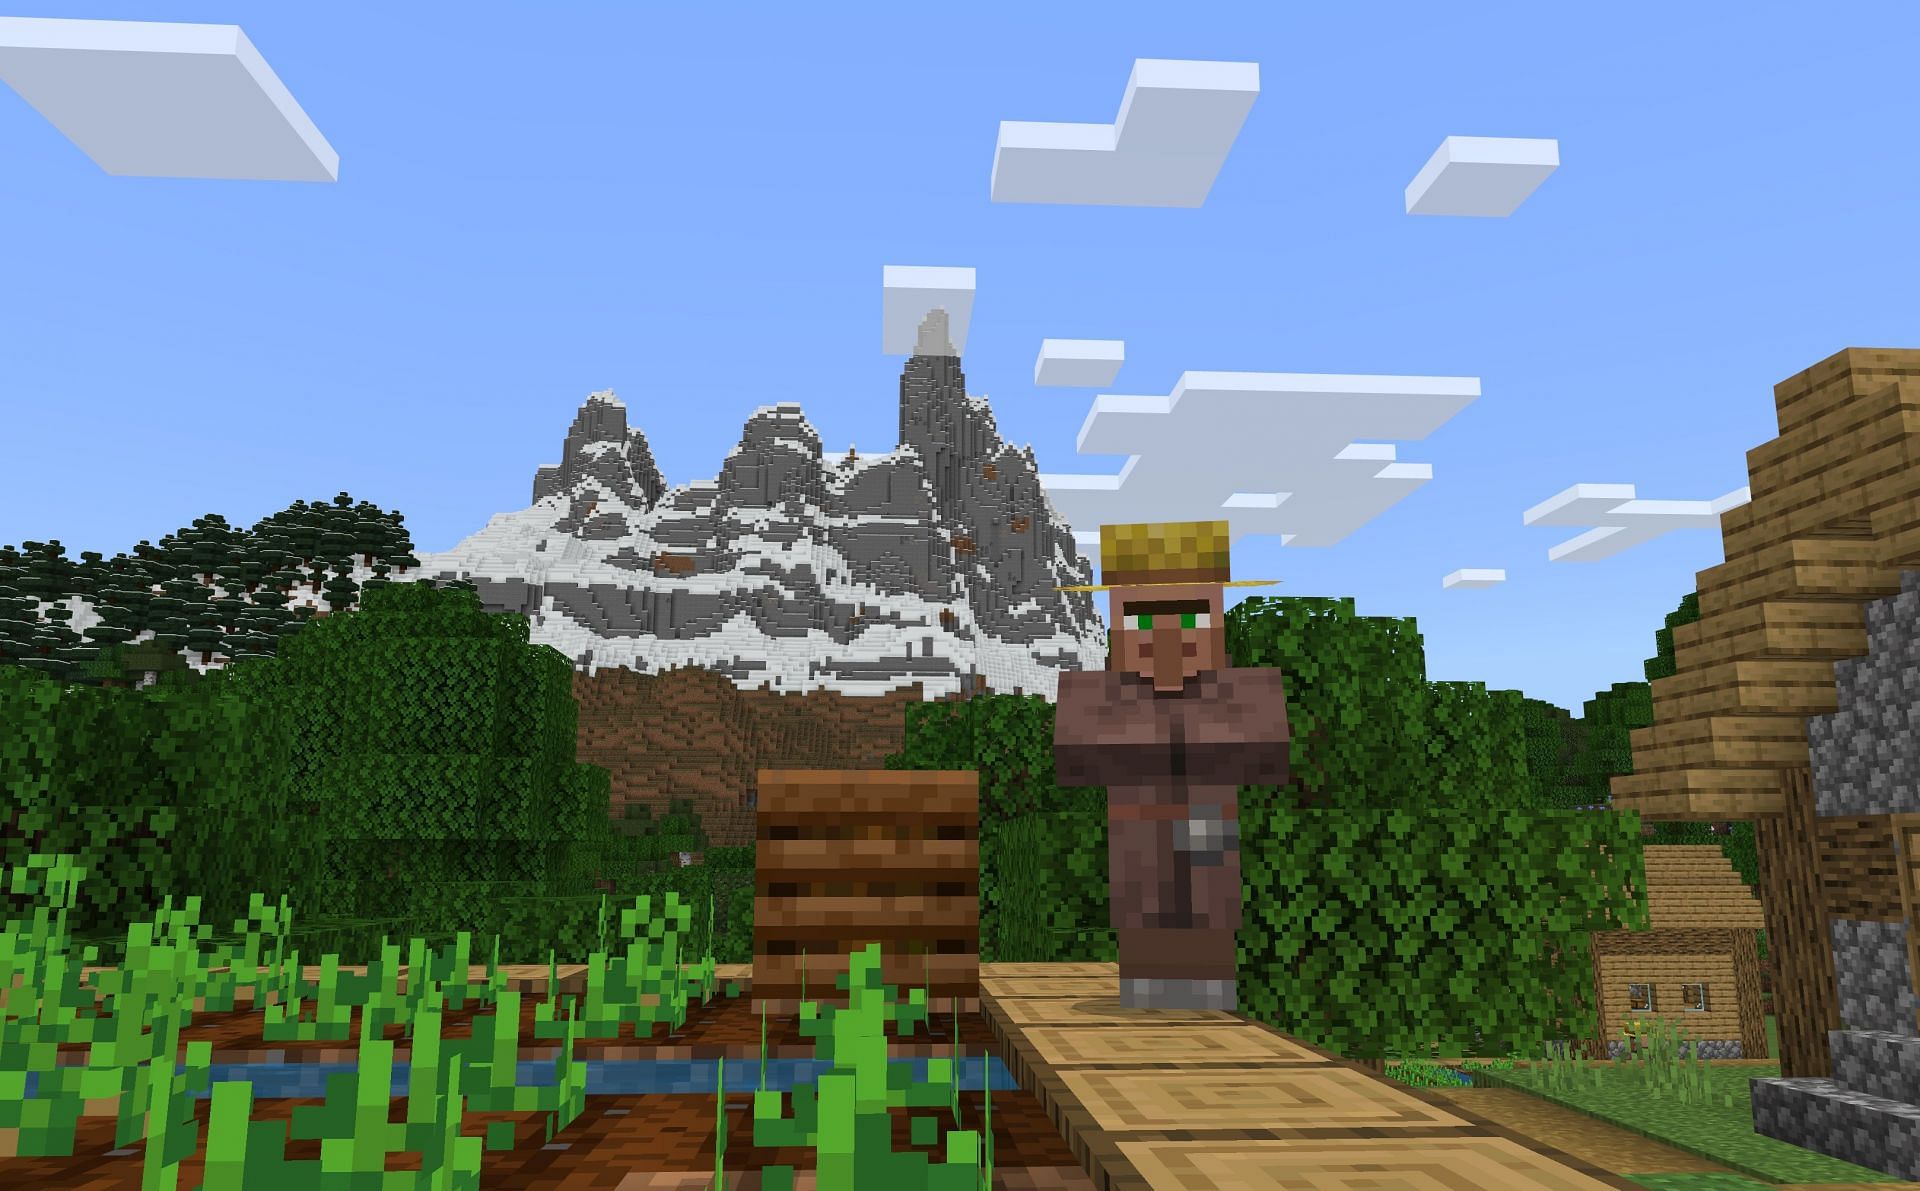 The pre-release has arrived, with the full version coming very soon. (Image via Minecraft)